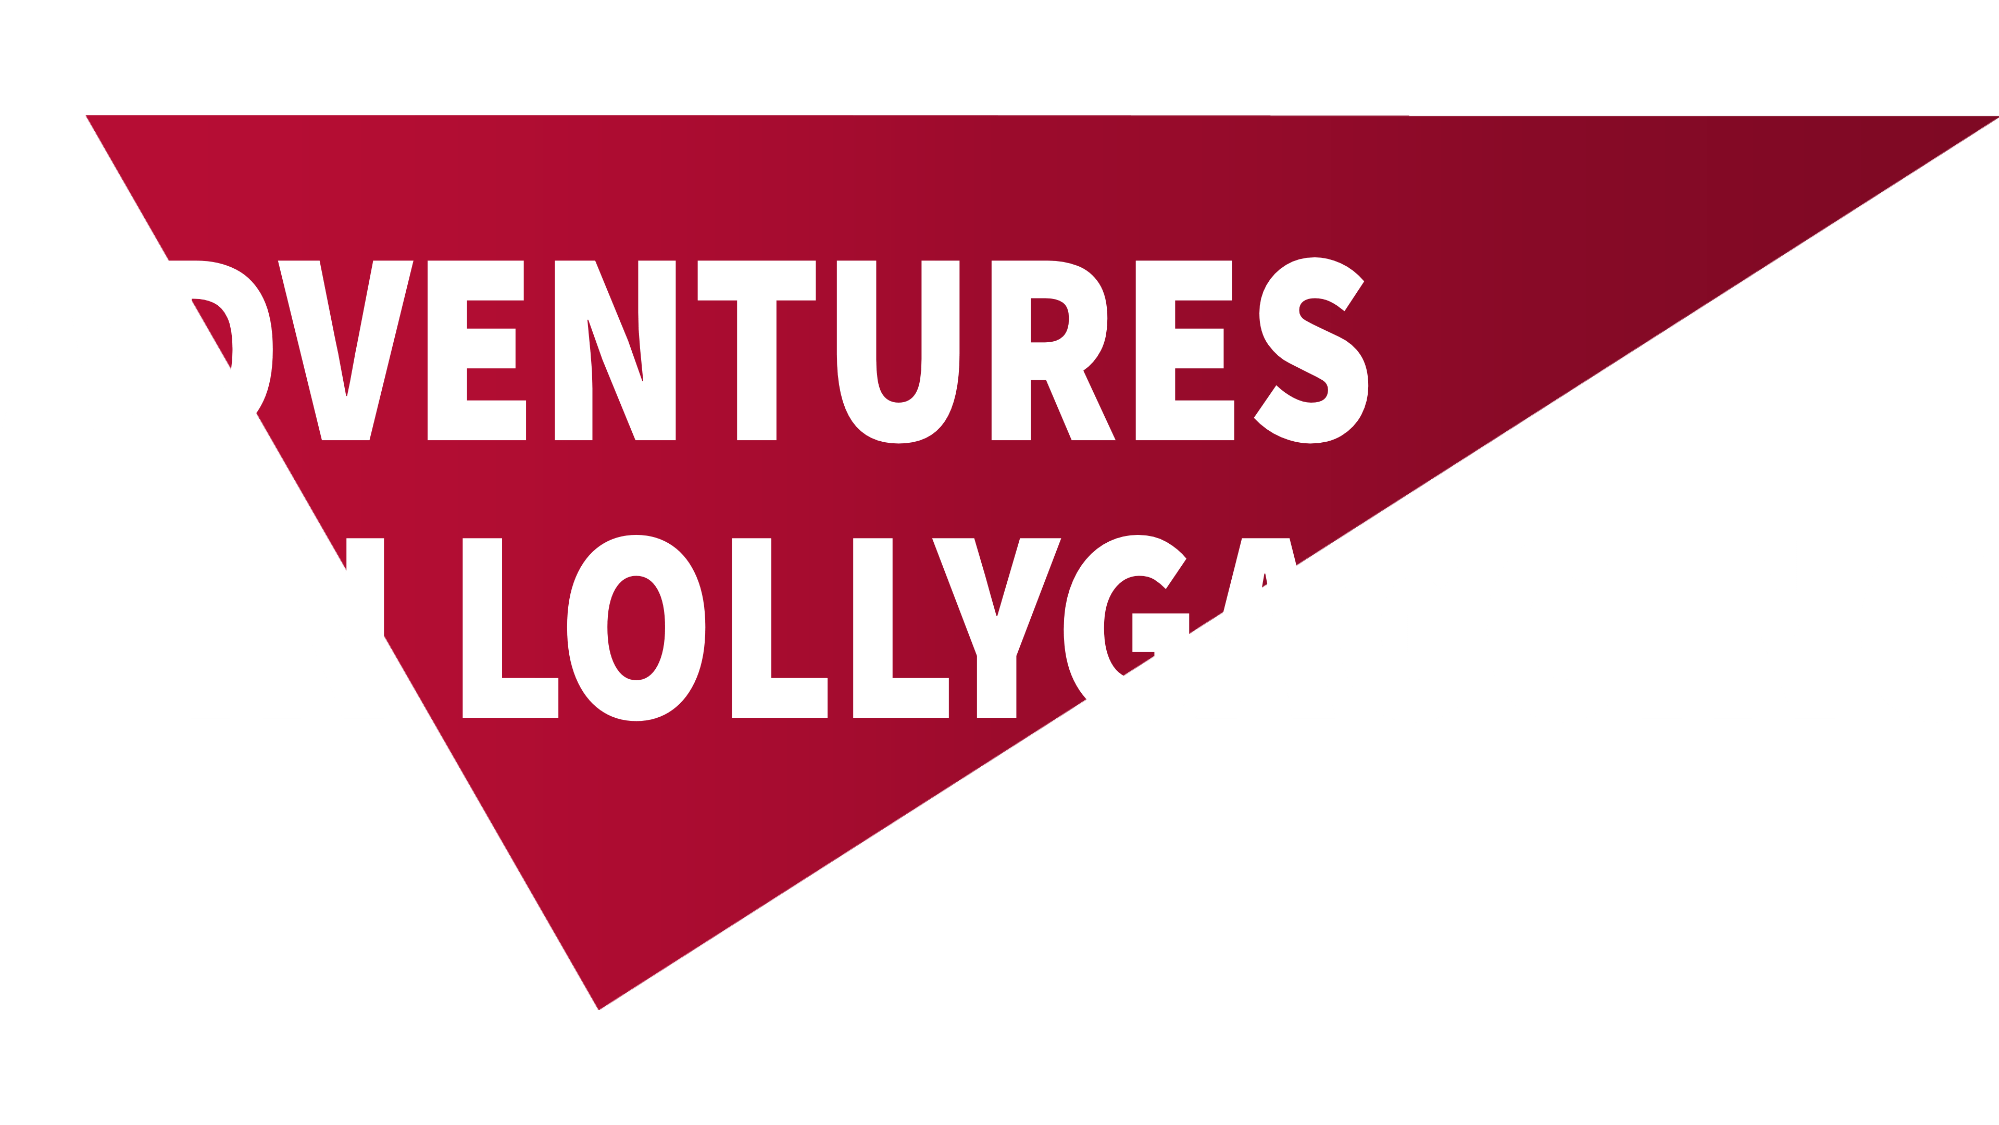 Lollygag — We are moving stories